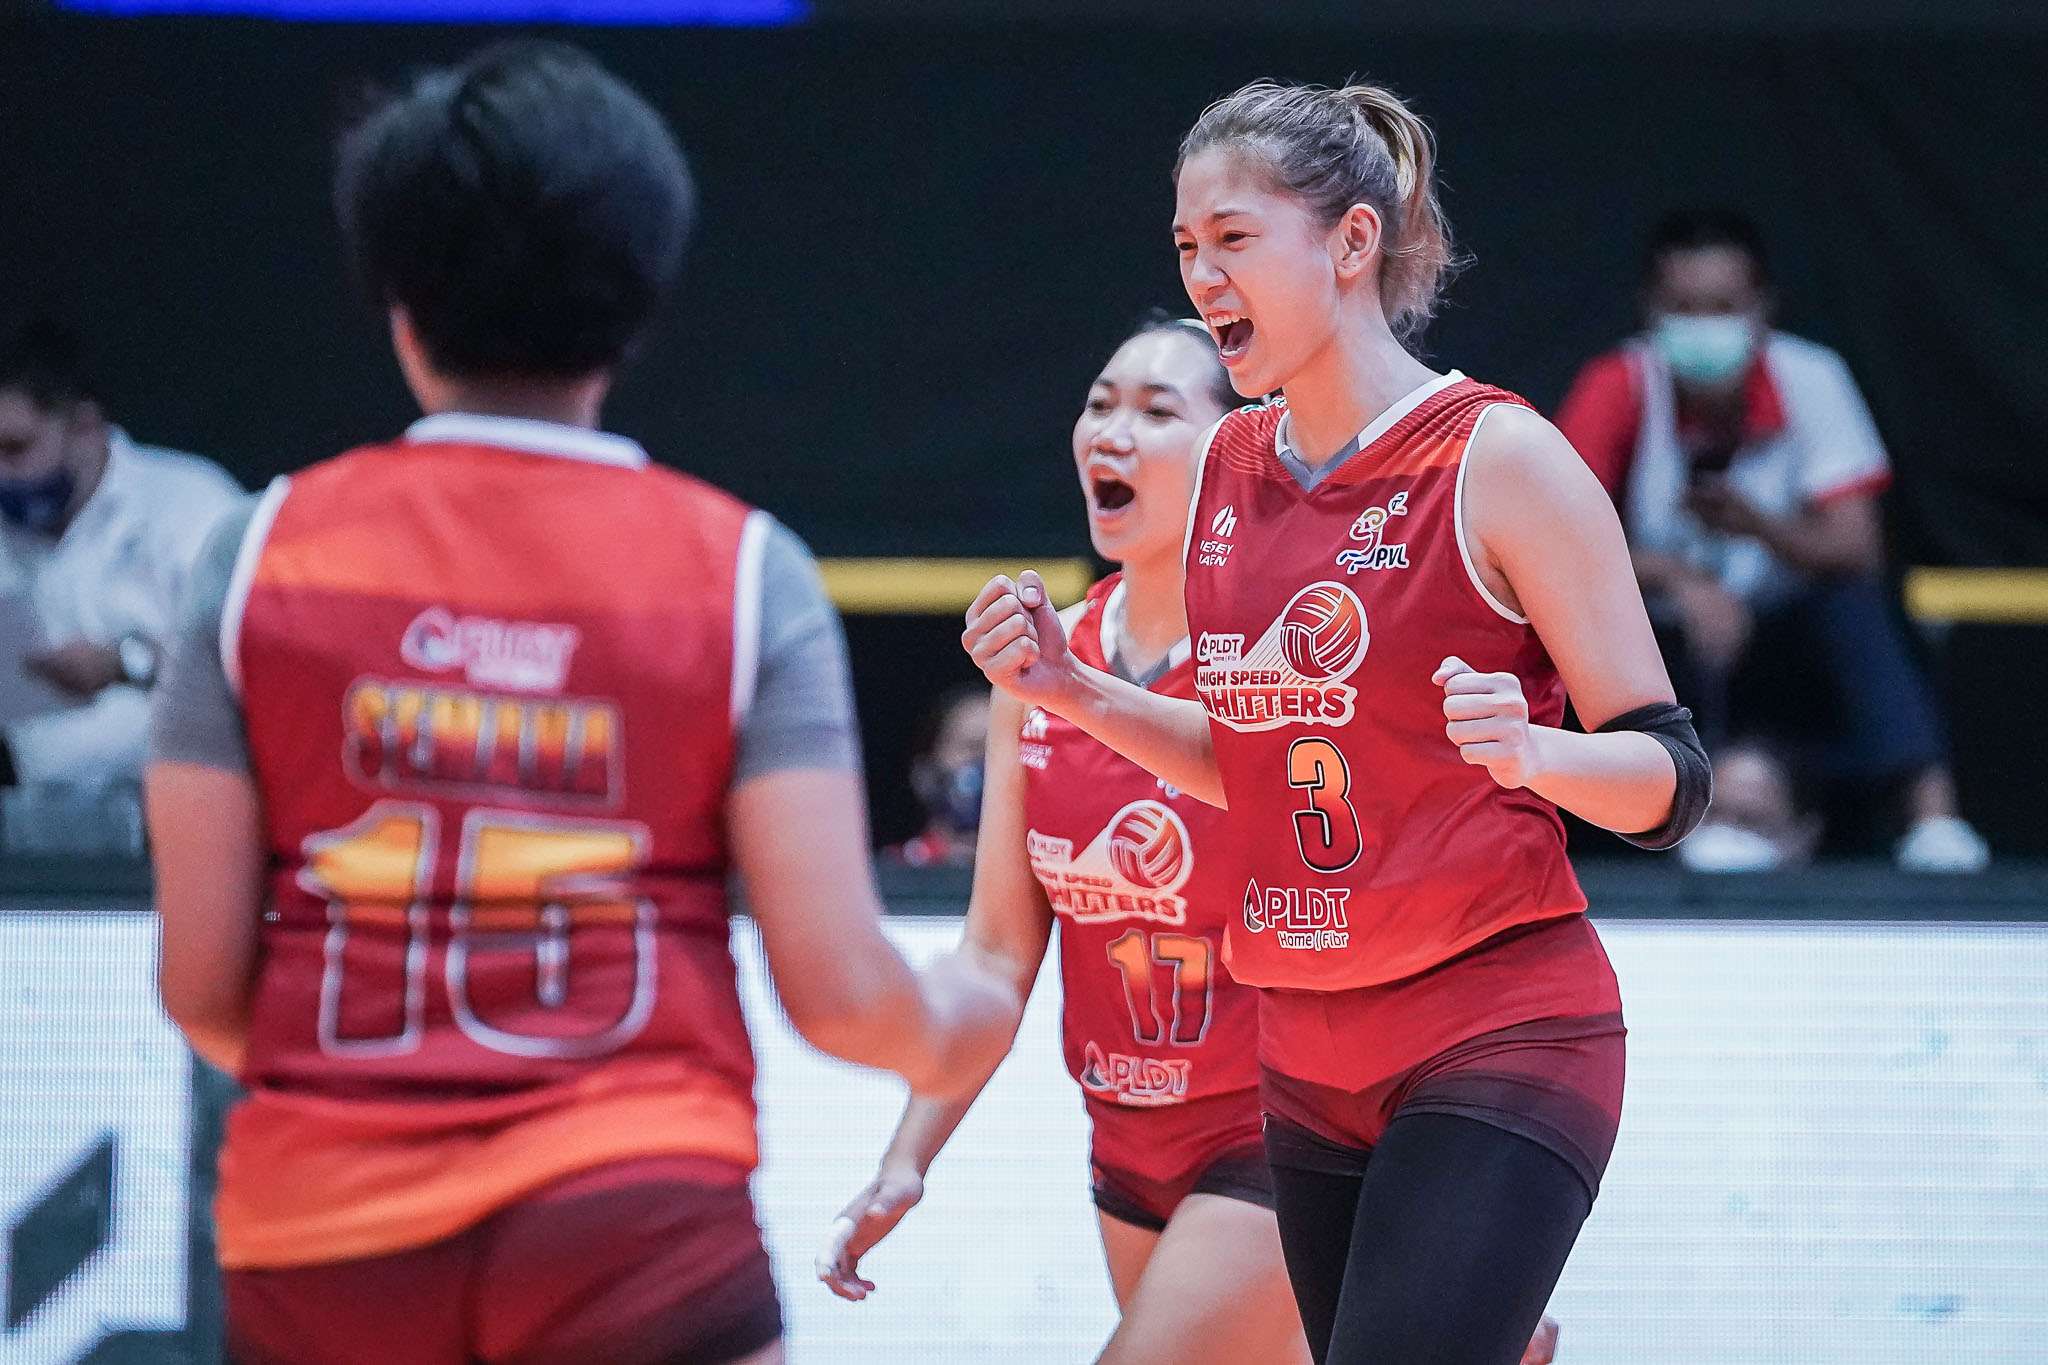 PVL: PLDT vows to push harder in playoffs after ‘frustrating’ pool stage showing